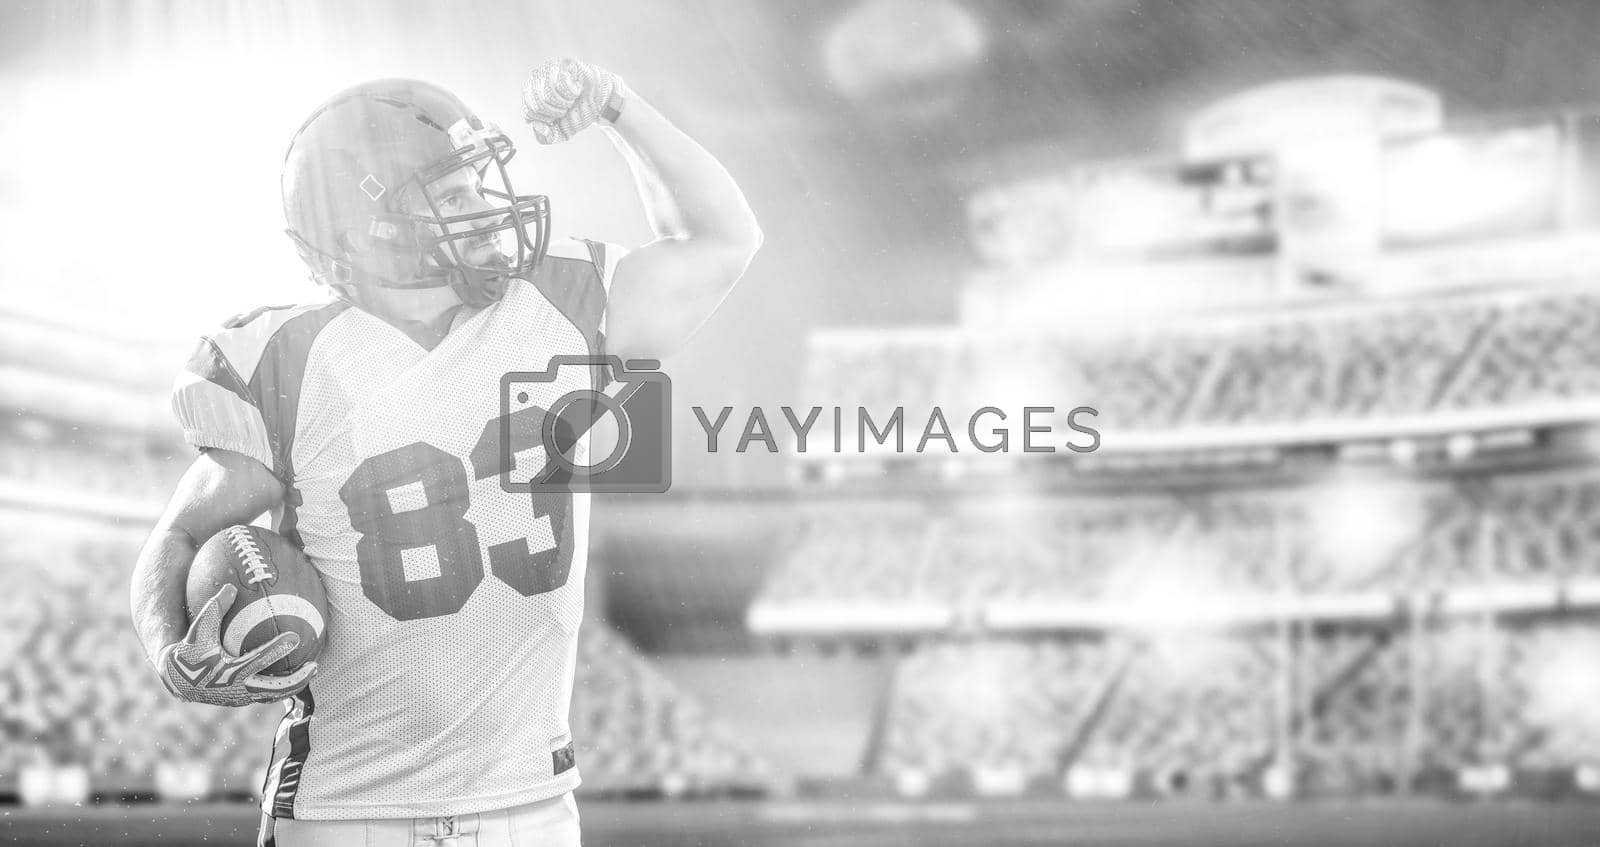 Royalty free image of american football player celebrating touchdown by dotshock